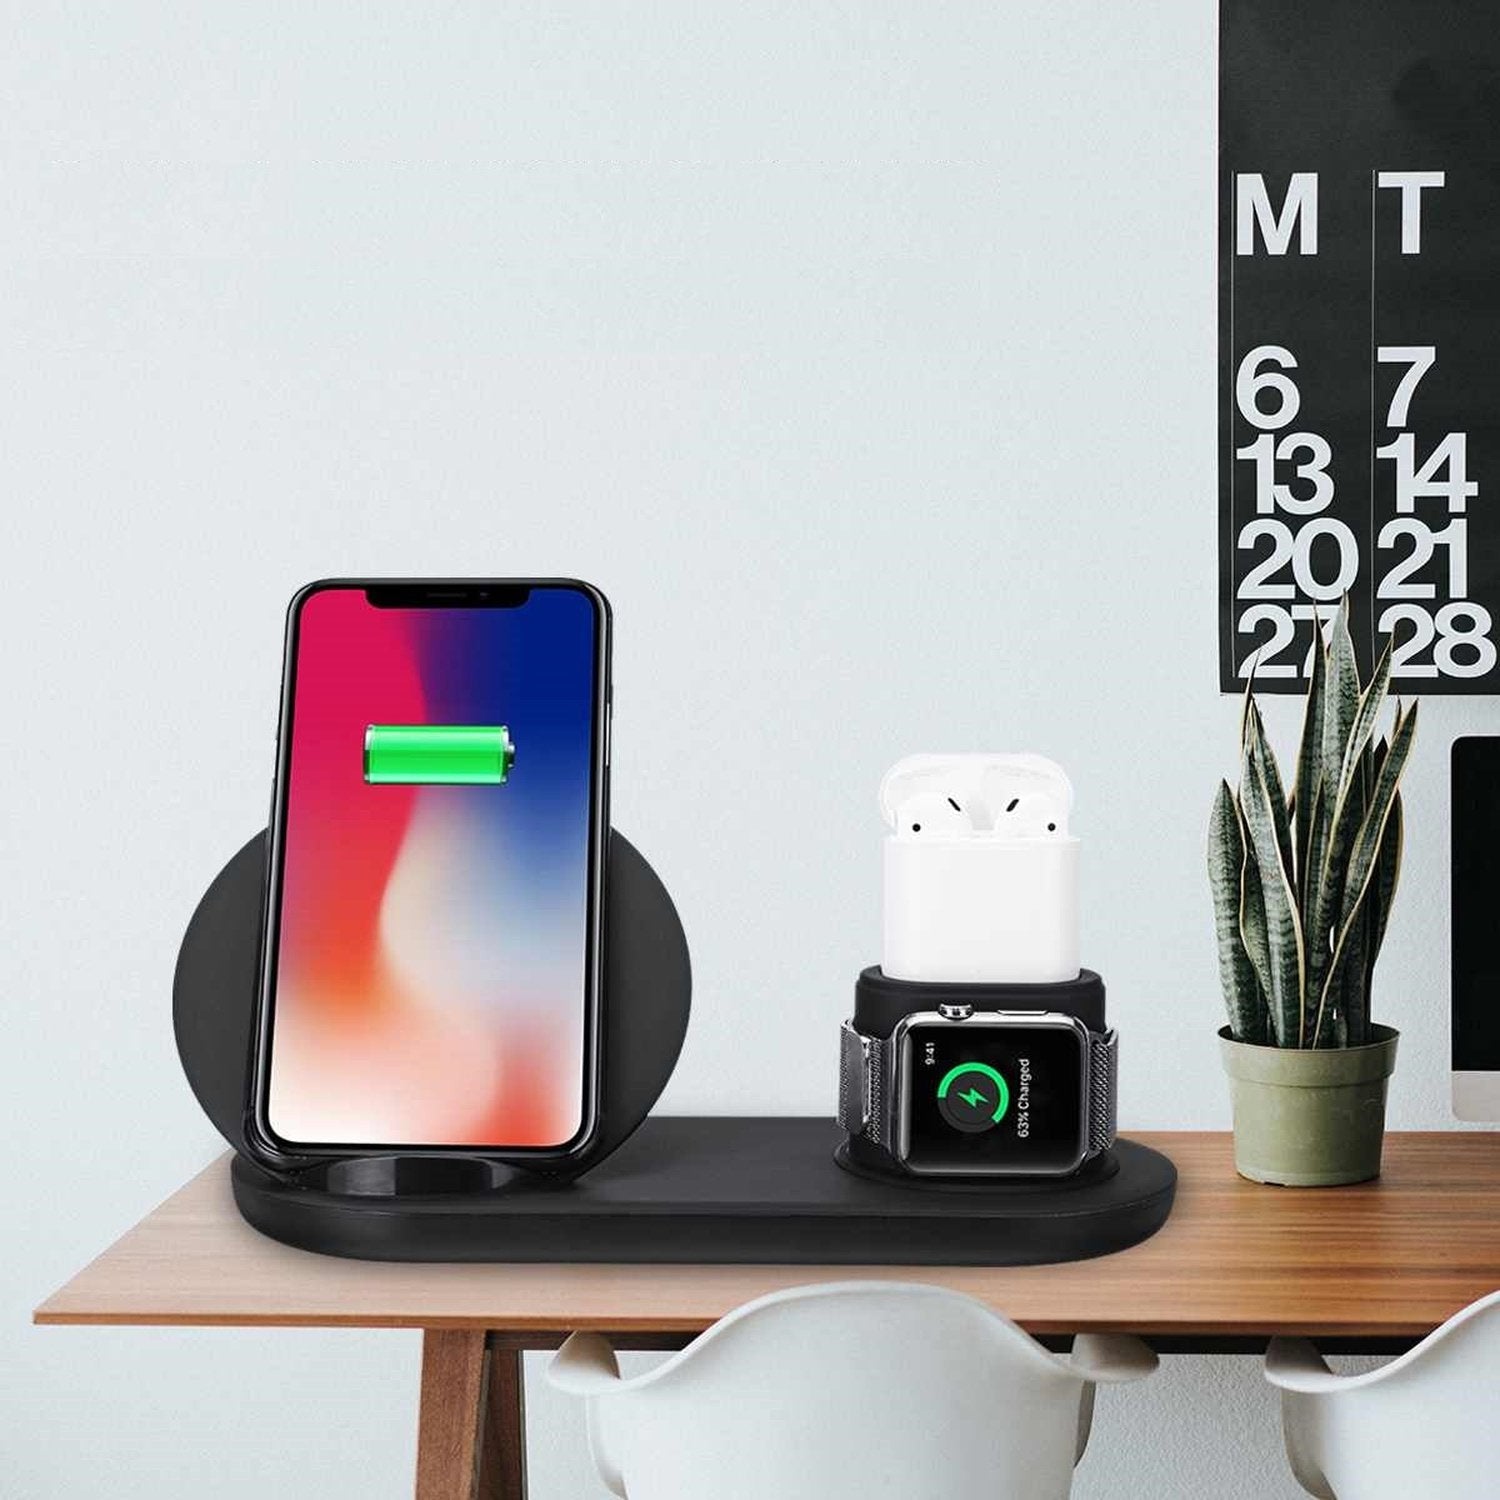 3-in-1 Multi Device Wireless Charging Dock Station compatible with Apple iPhone, Samsung, Android, iWatch, Airpods, Google Pixel